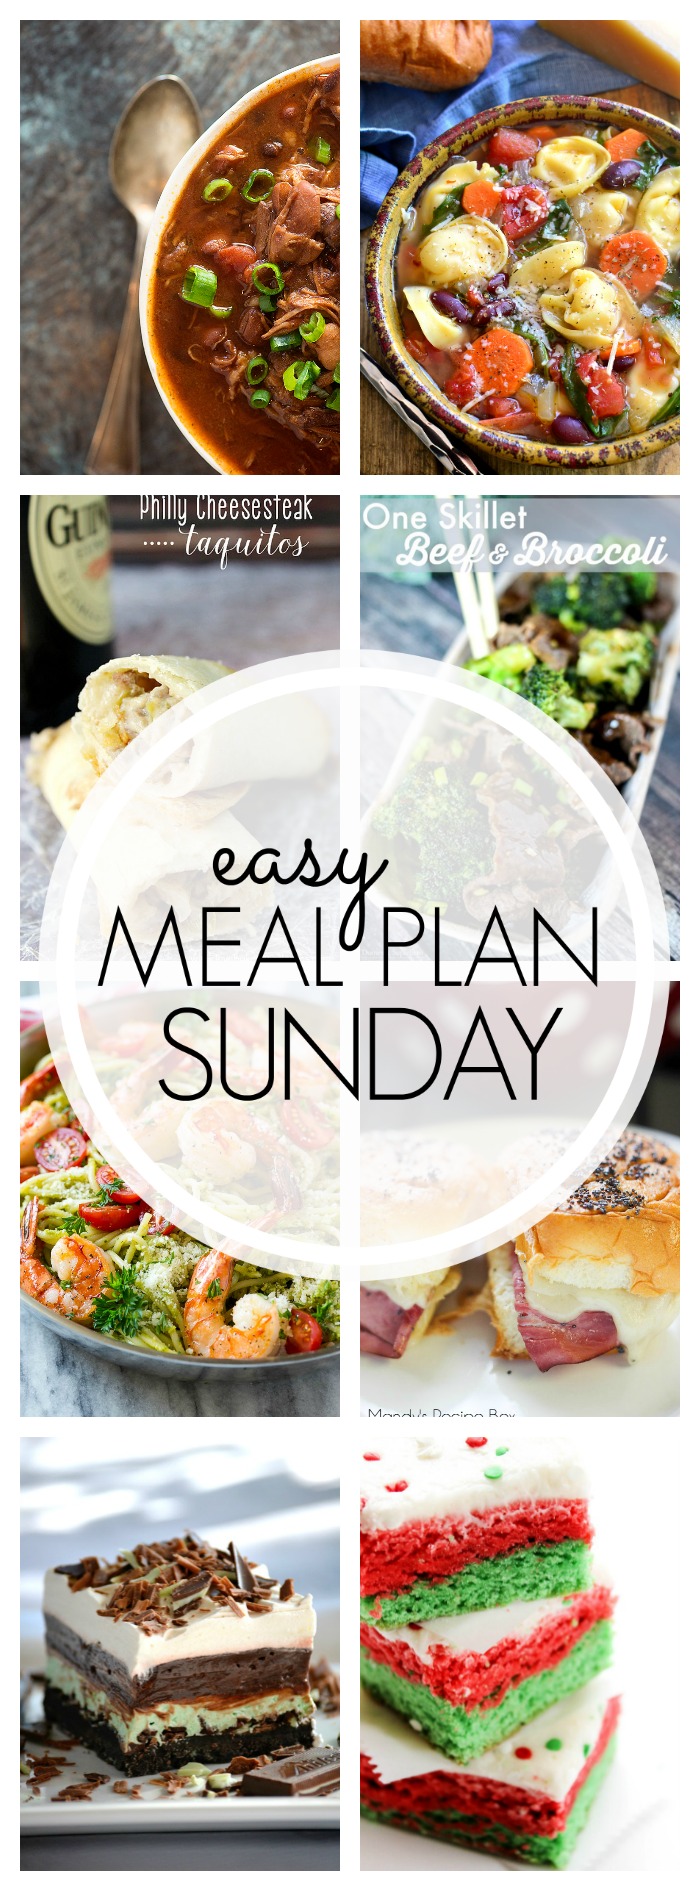 Easy Meal Plan Sunday #77